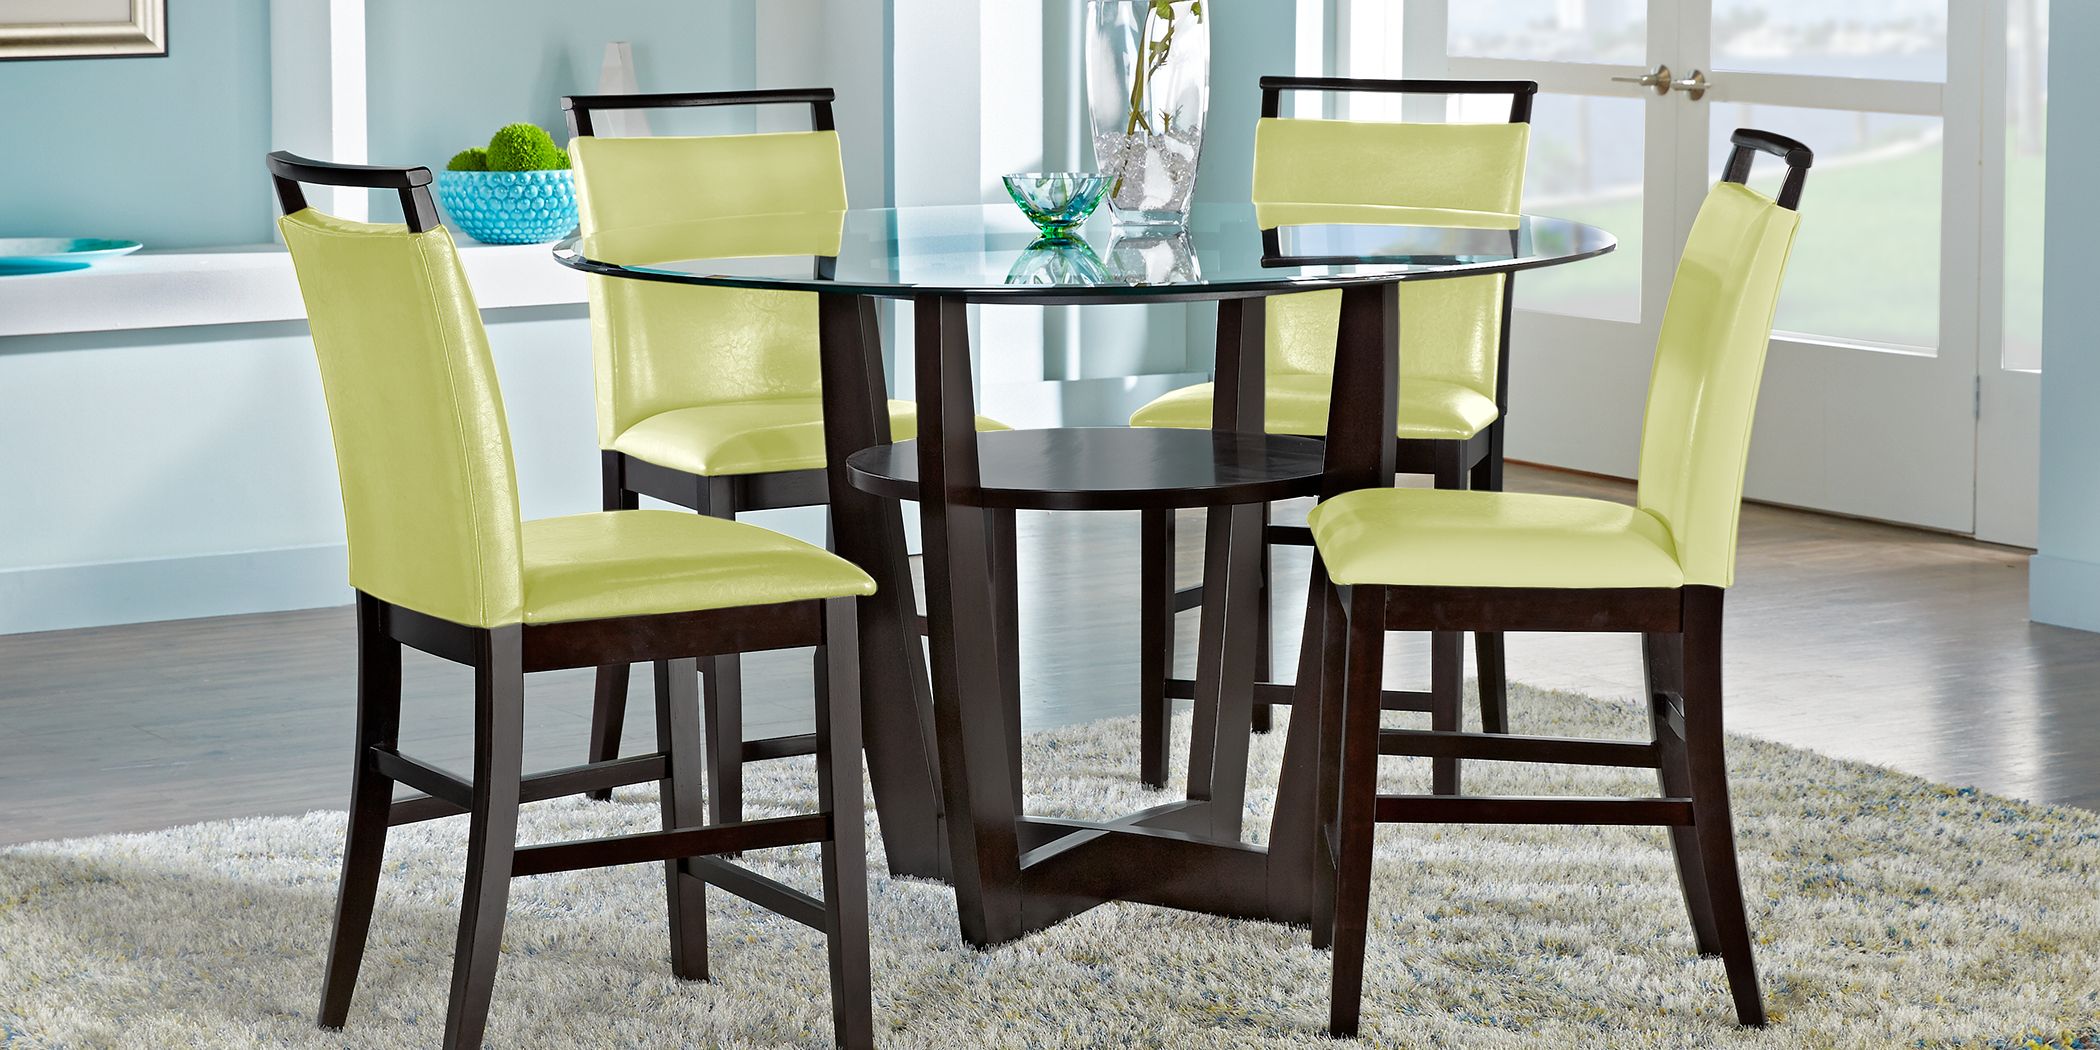 Dining Room Table Sets Under 500, Kitchen Round Table And Chairs Set